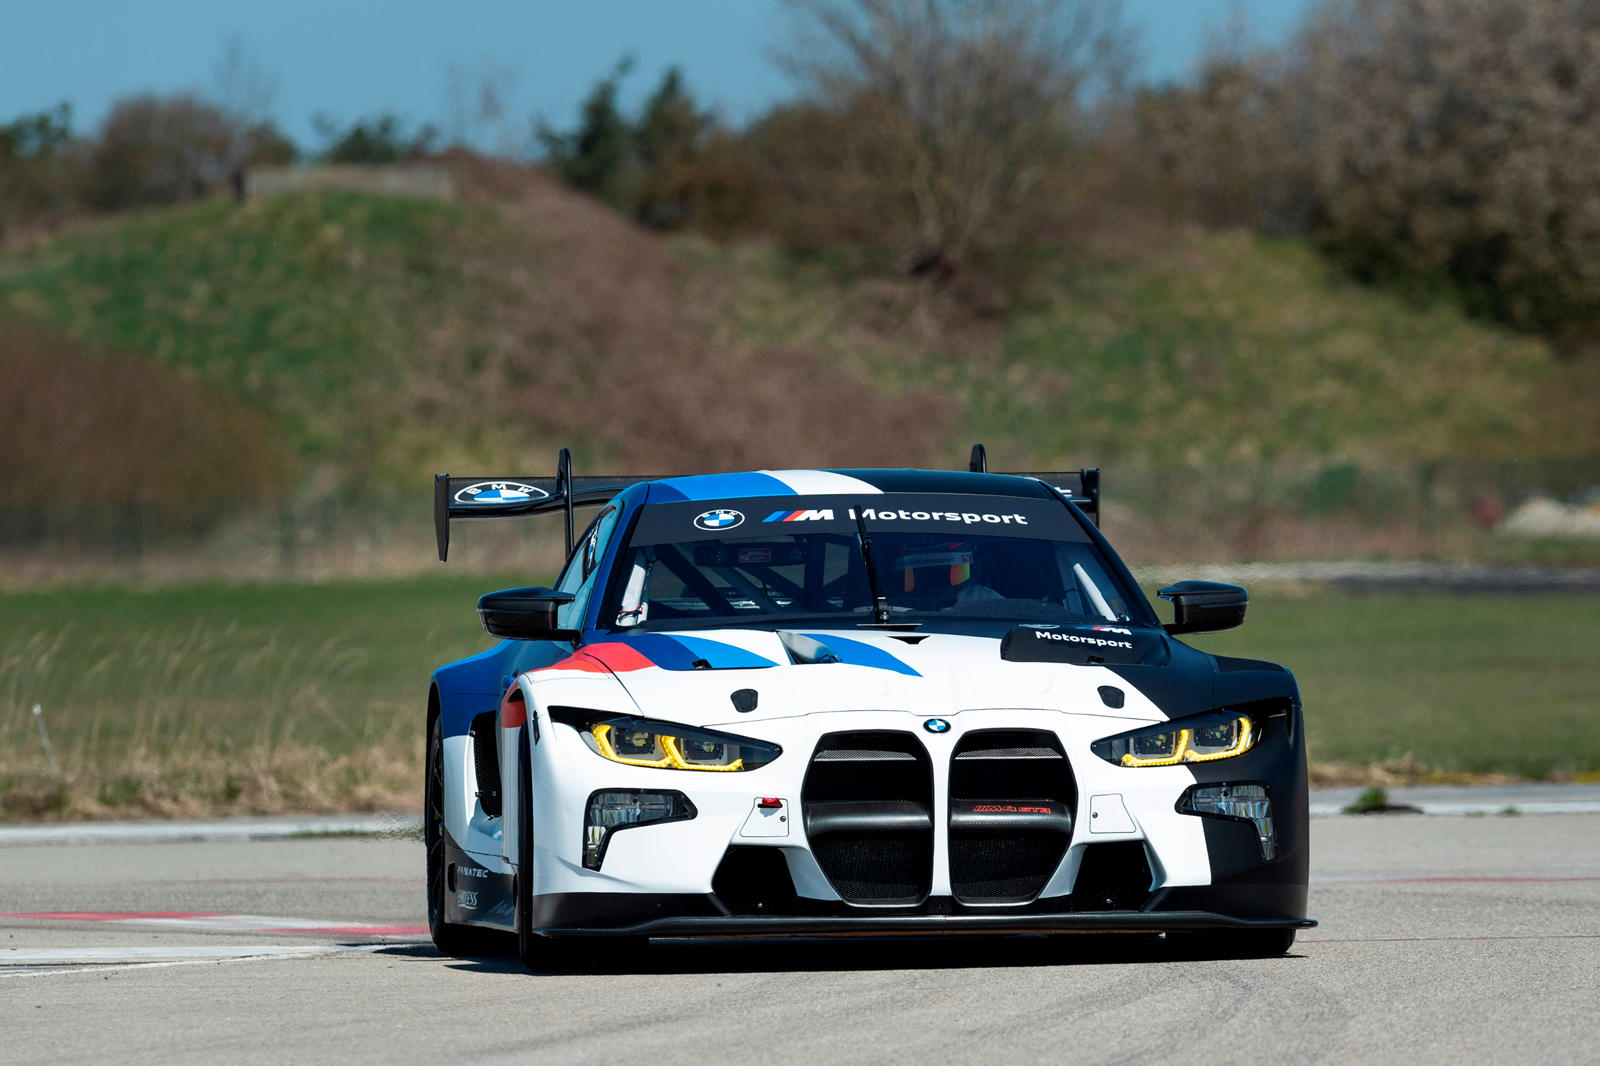 BMW M4 GT3 Race Car Arrives With $530,000 Price Tag | CarBuzz